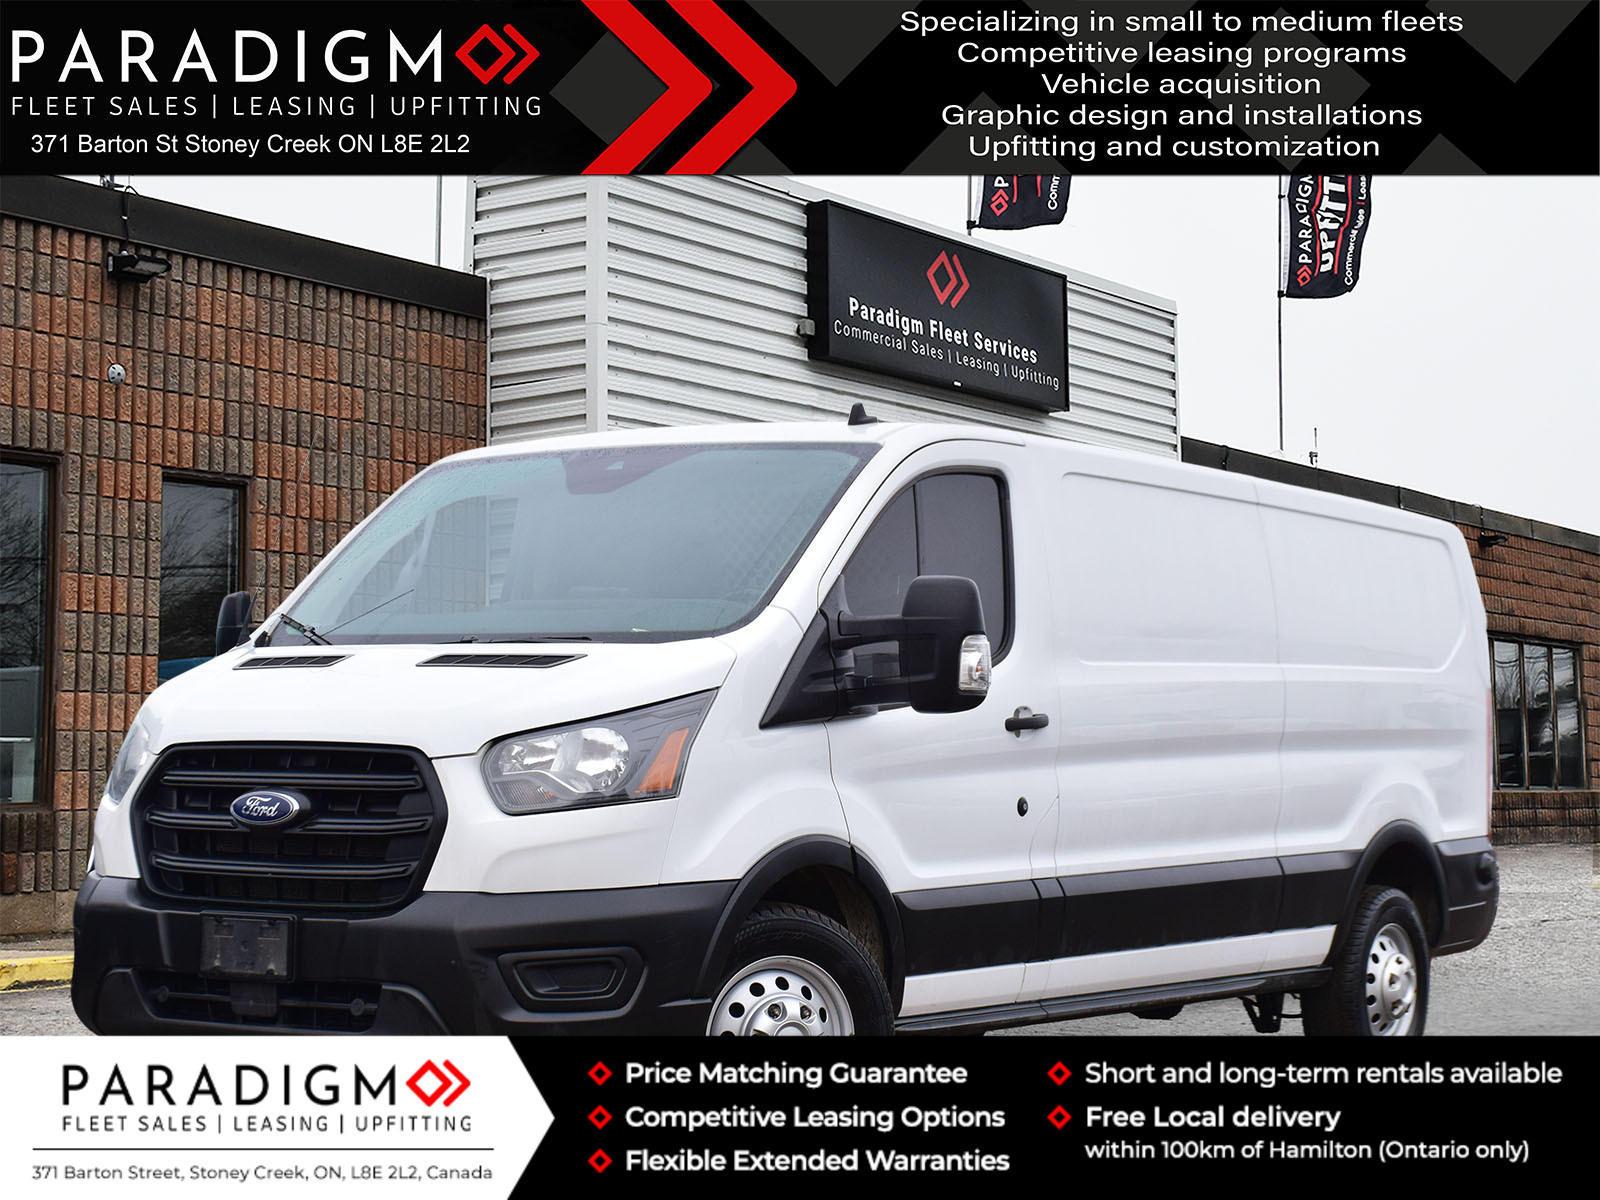 2020 Ford Transit T150 AWD Ecoboost 148-Inch WB Low Roof Cargo